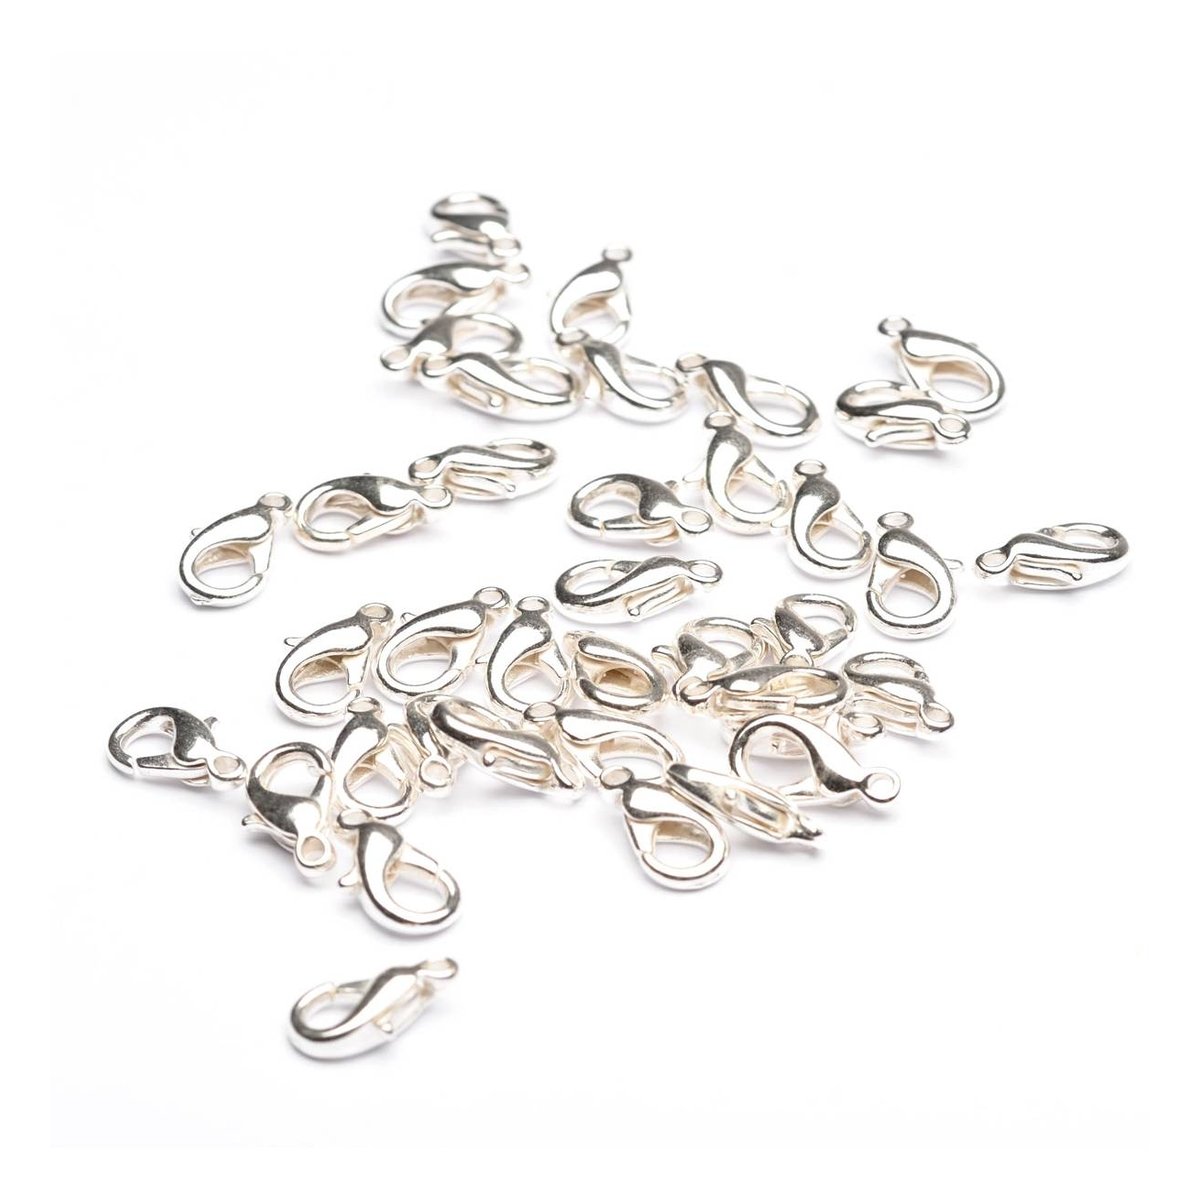 Beads Unlimited Silver Plated Trigger Clasp 10mm x 6mm 10 Pack